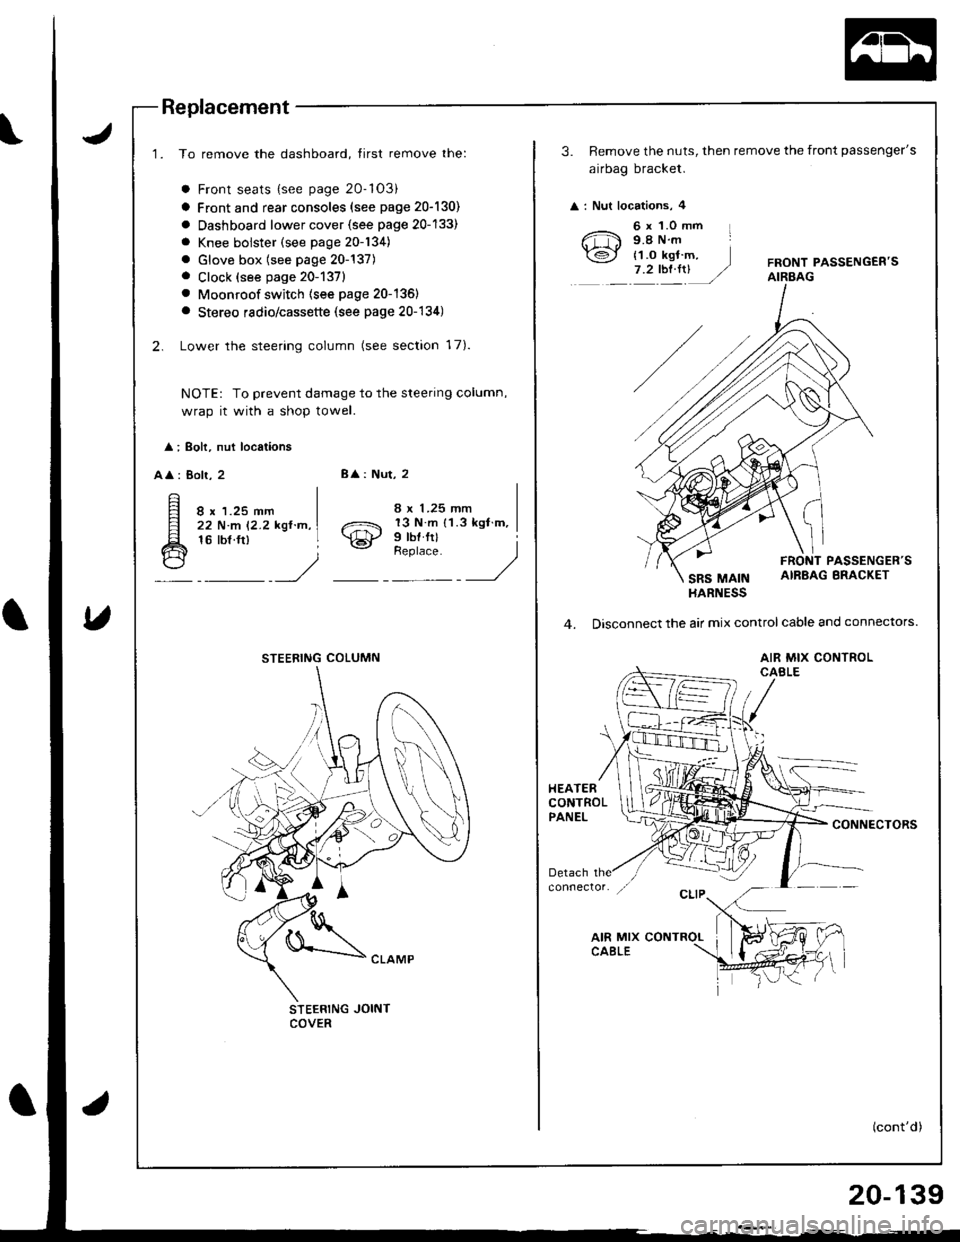 ACURA INTEGRA 1998  Service Repair Manual Replacement
1. To remove the dashboard, tirst remove the:
a Front seats {see page 20-103)
a Front and rear consoles (see page 20-130)
a Oashboard lower cover {see page 20-133)
a Knee bolster (see pag